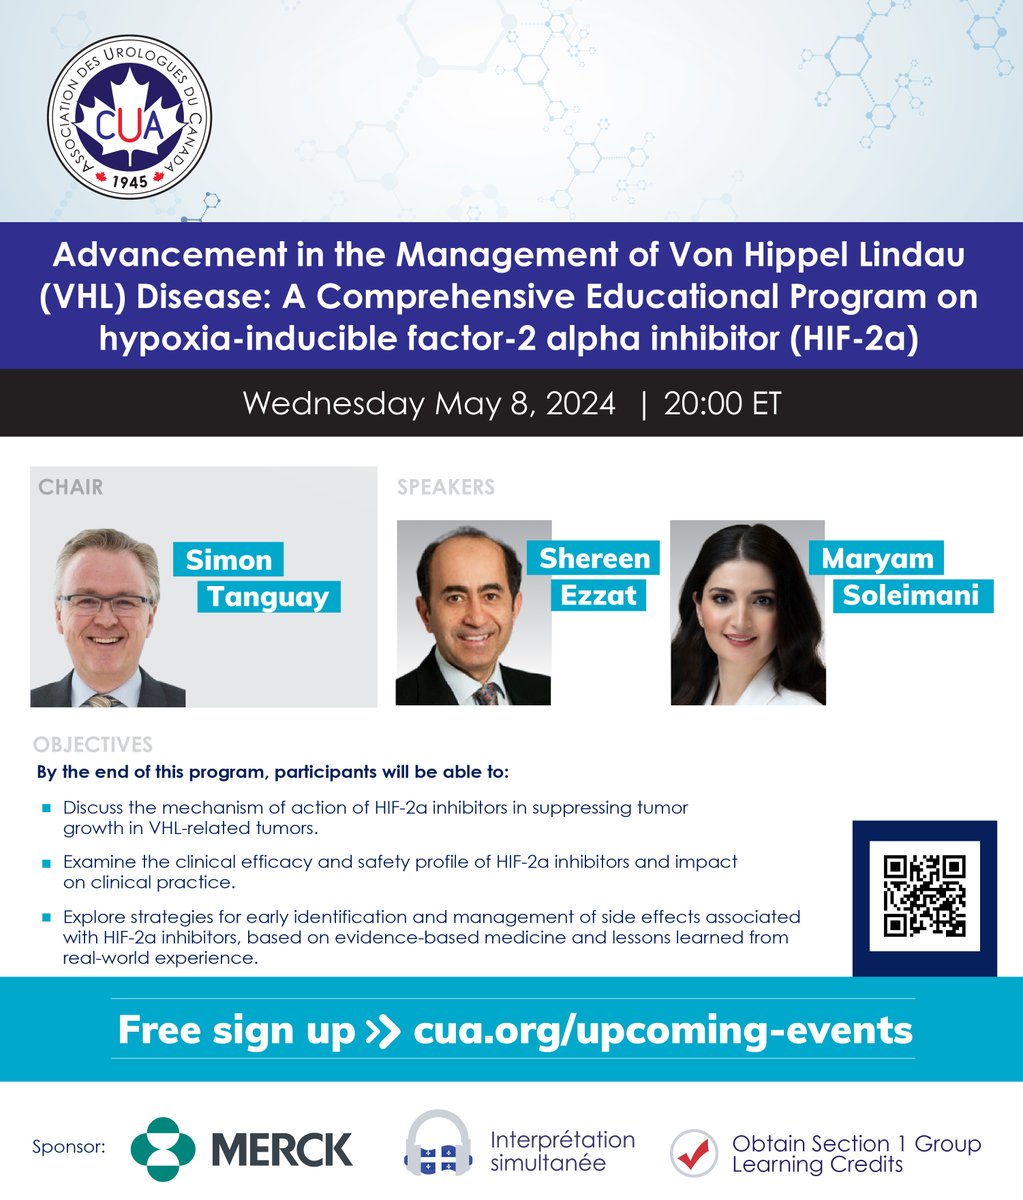 JOIN US next week for: Advancement in the management of Von Hippel Lindau (VHL) Disease: A Comprehensive Educational Program on hypoxia-inducible factor-2 alpha inhibitor (HIF-2a) Registration is free:cua.org/event/25273 @SiTanguay @MSoleimani_MD